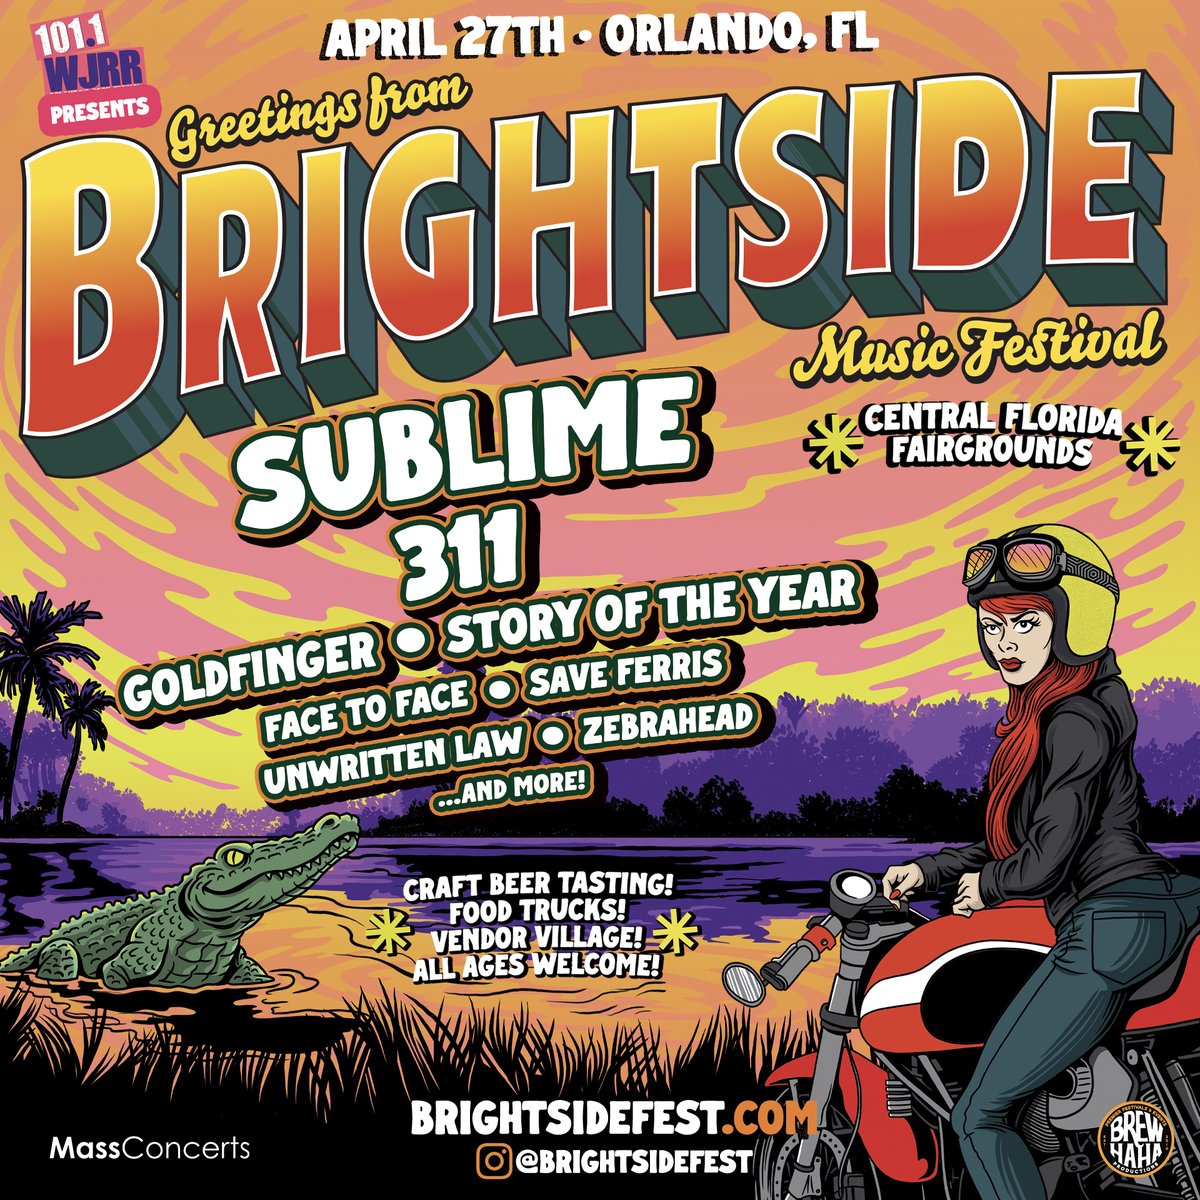 Hey Florida, hope you're ready for this one! We're coming to Orlando for Brightside Music Festival on April 27th! Tickets go on sale this Friday February 2nd at 10am est at brightsidefest.com.